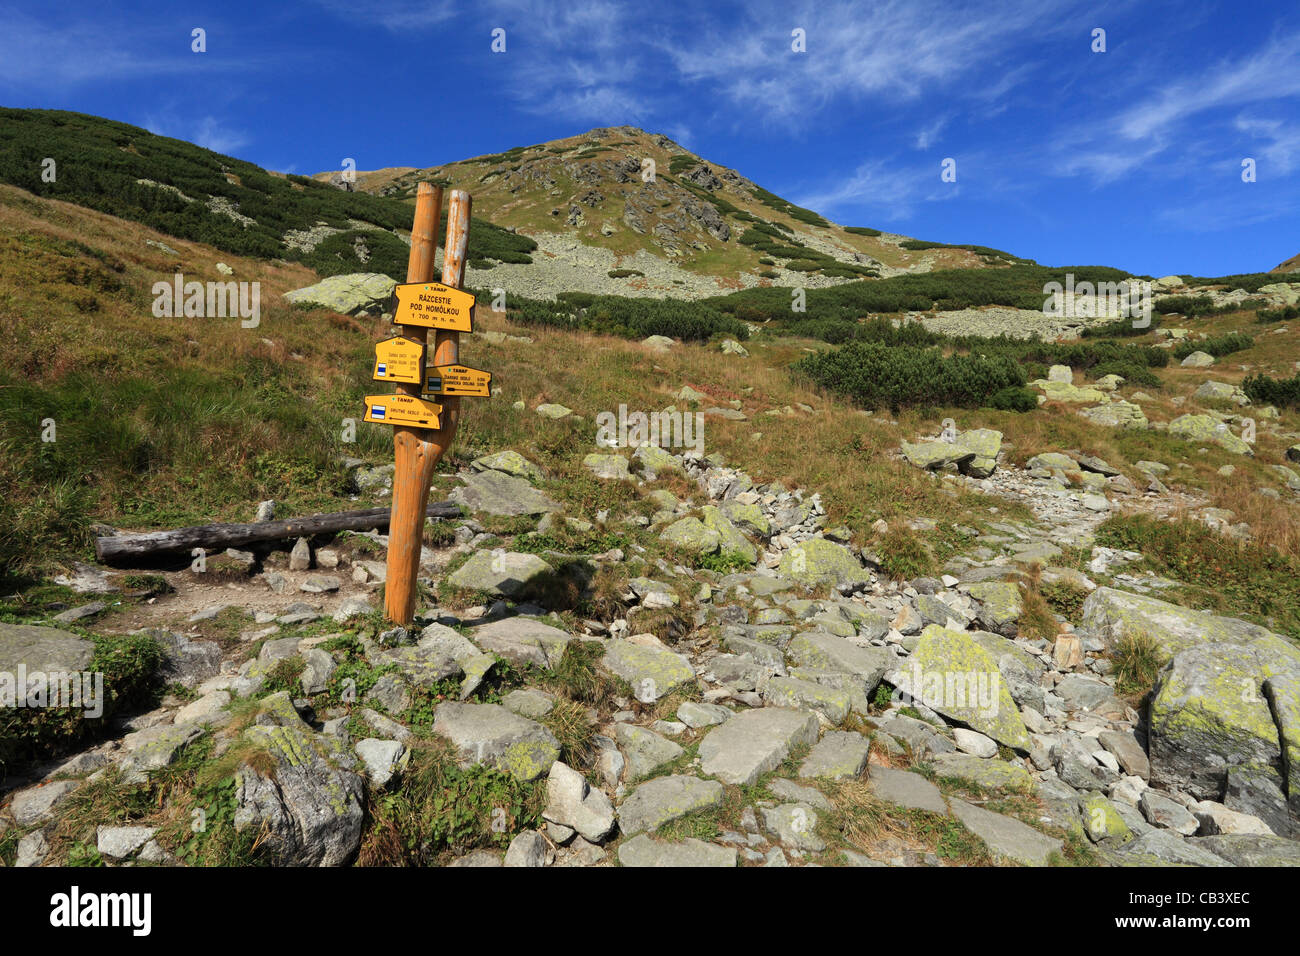 The tourist signpost on the trail to Ziarske sedlo in Rohace, part of High Tatras National Park, Slovakia. Stock Photo